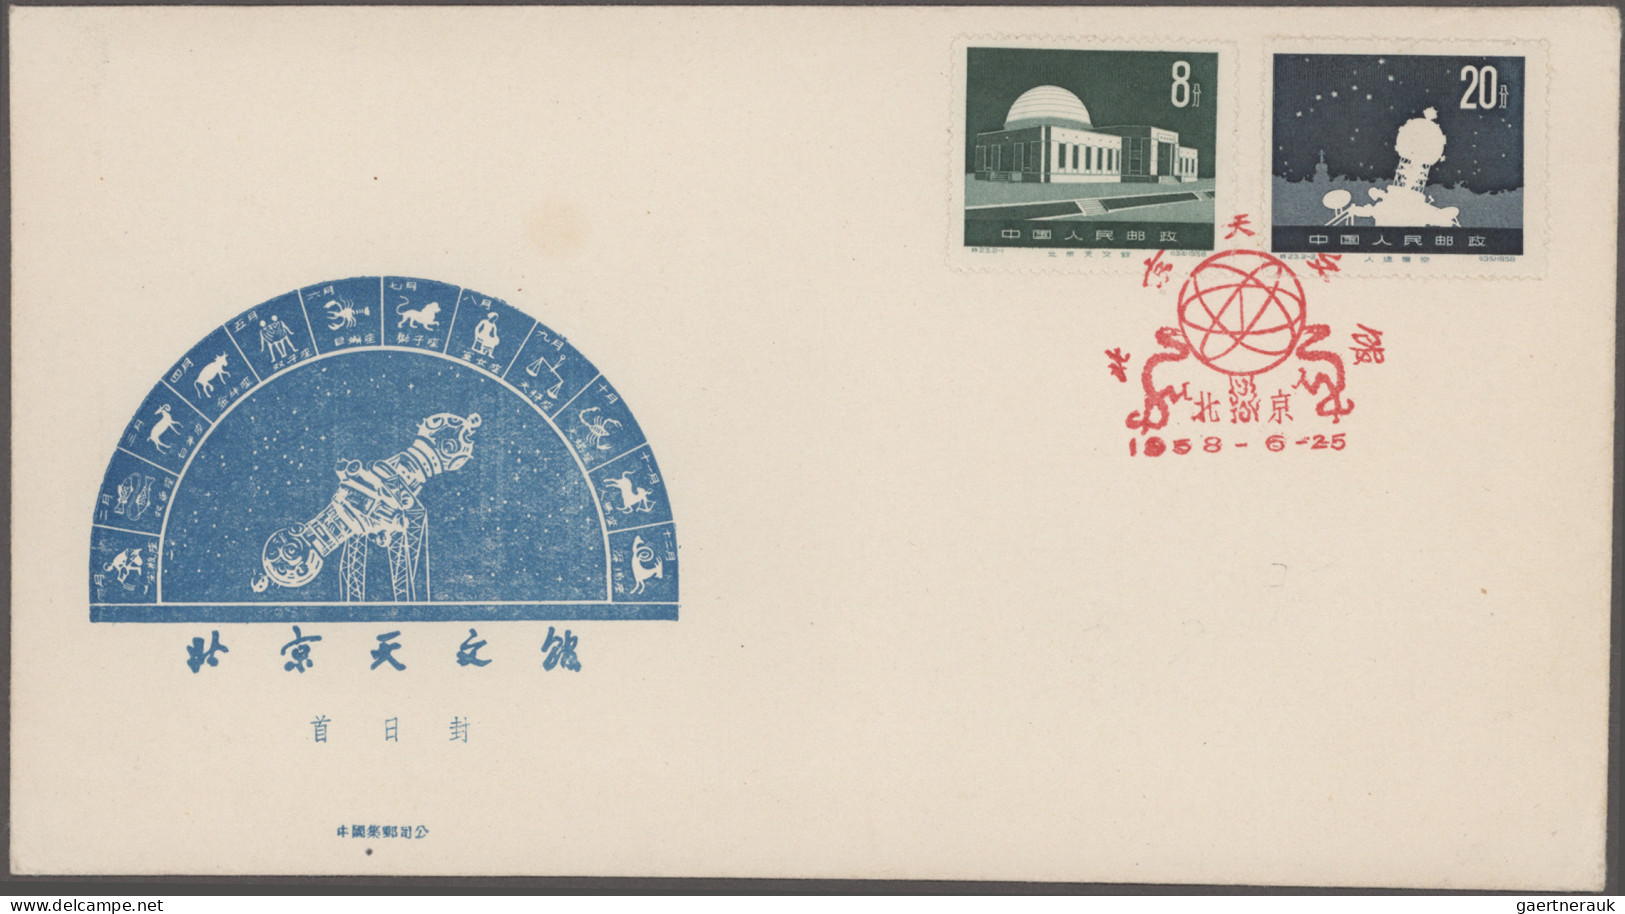 China (PRC): 1957/1961, unaddressed cacheted official FDC (12) of issues C44, C4